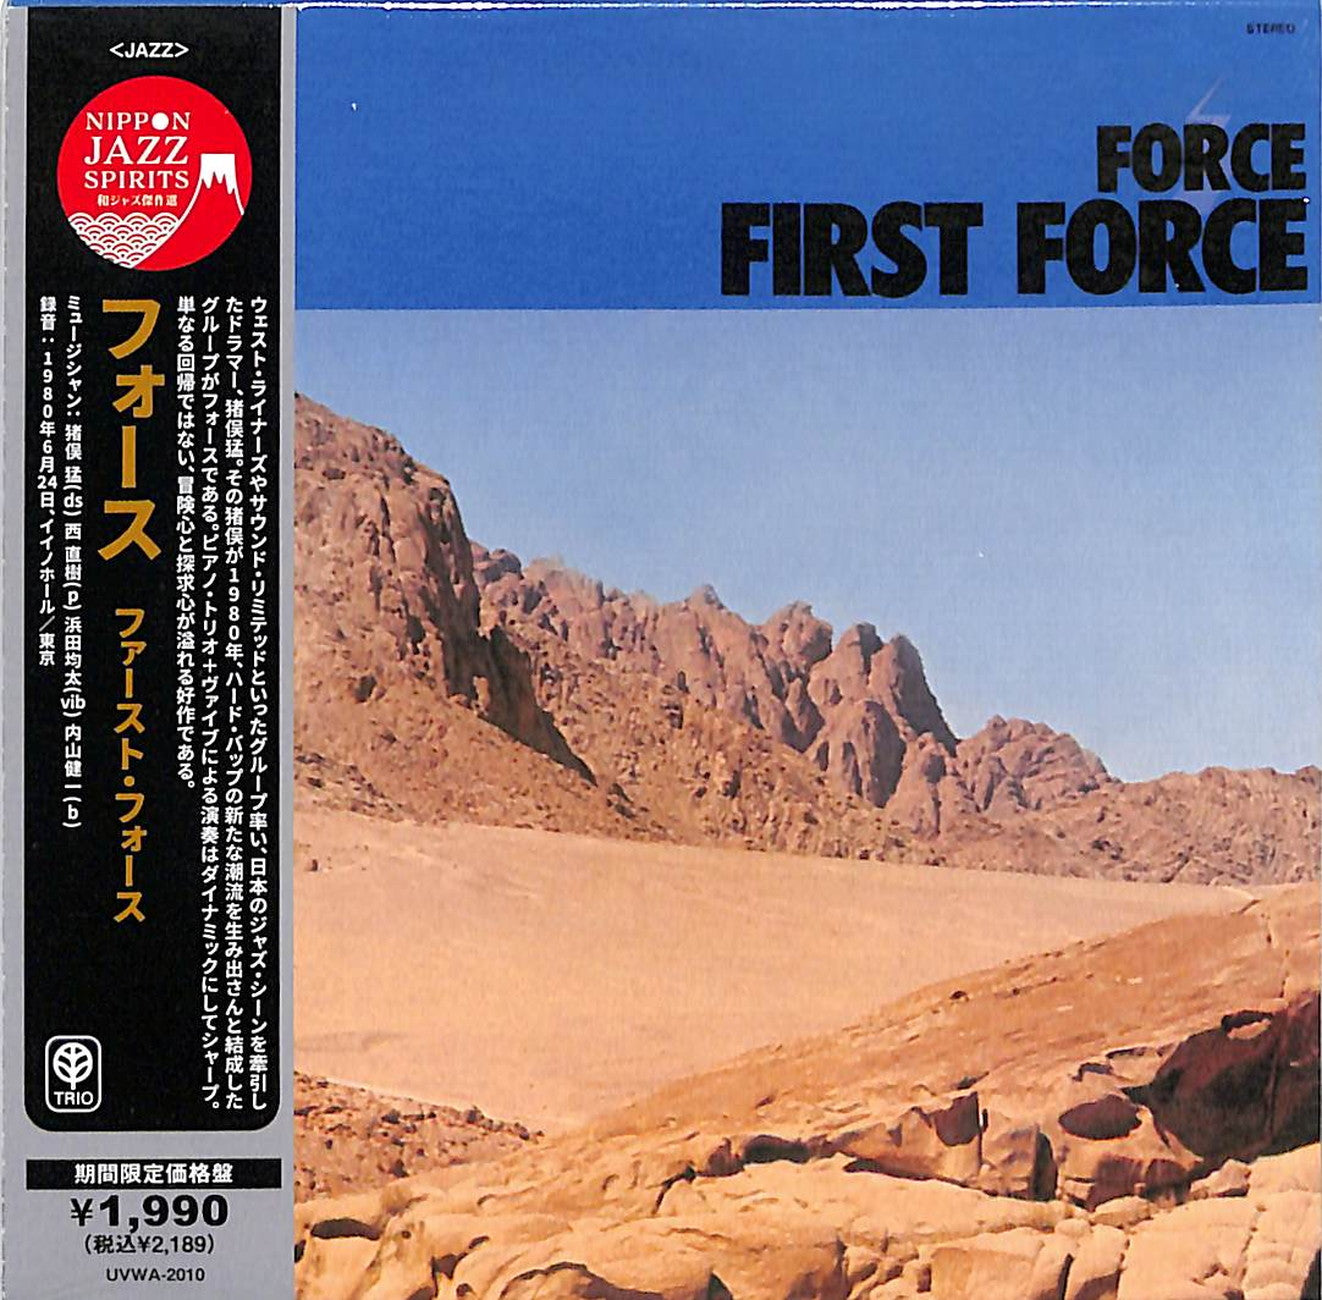 Force - First Force - Japan Mini LP CD Limited Edition - CDs Vinyl